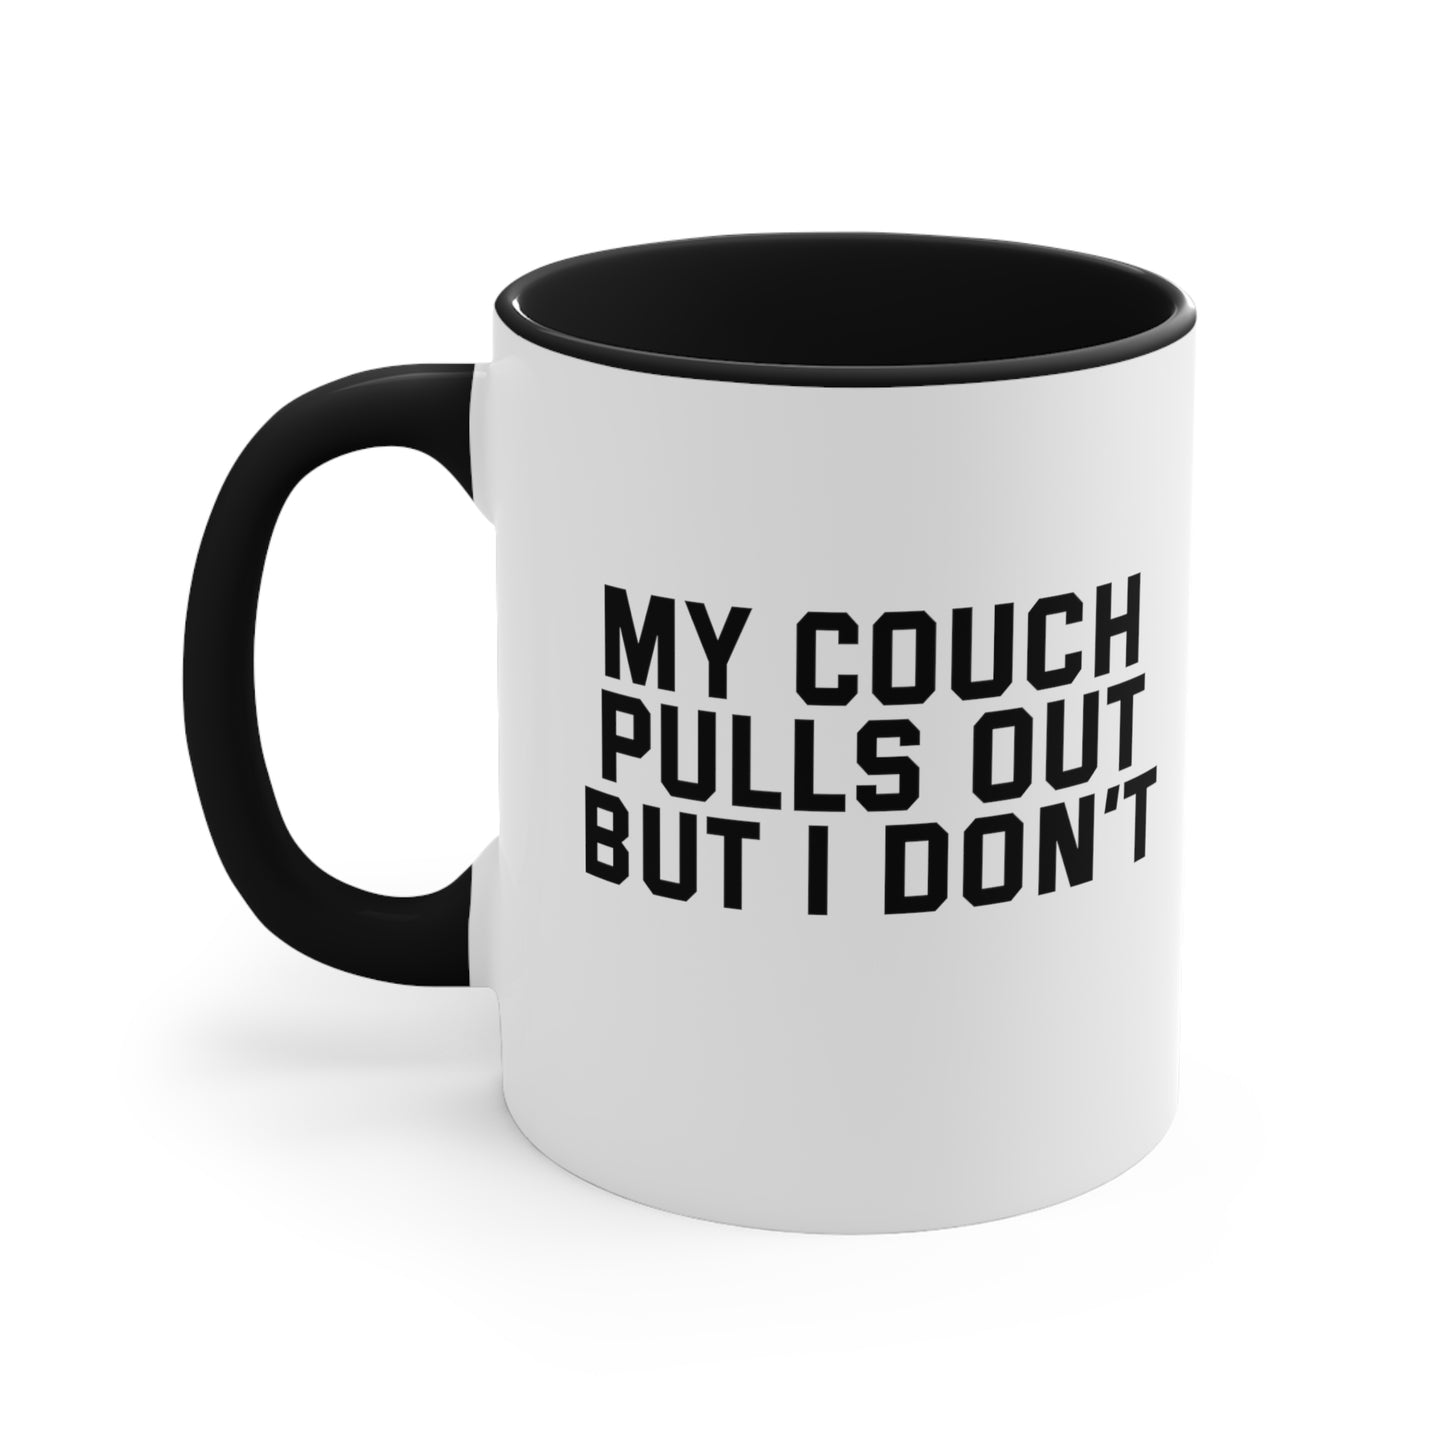 Couch Pulls Out Mug, 11oz